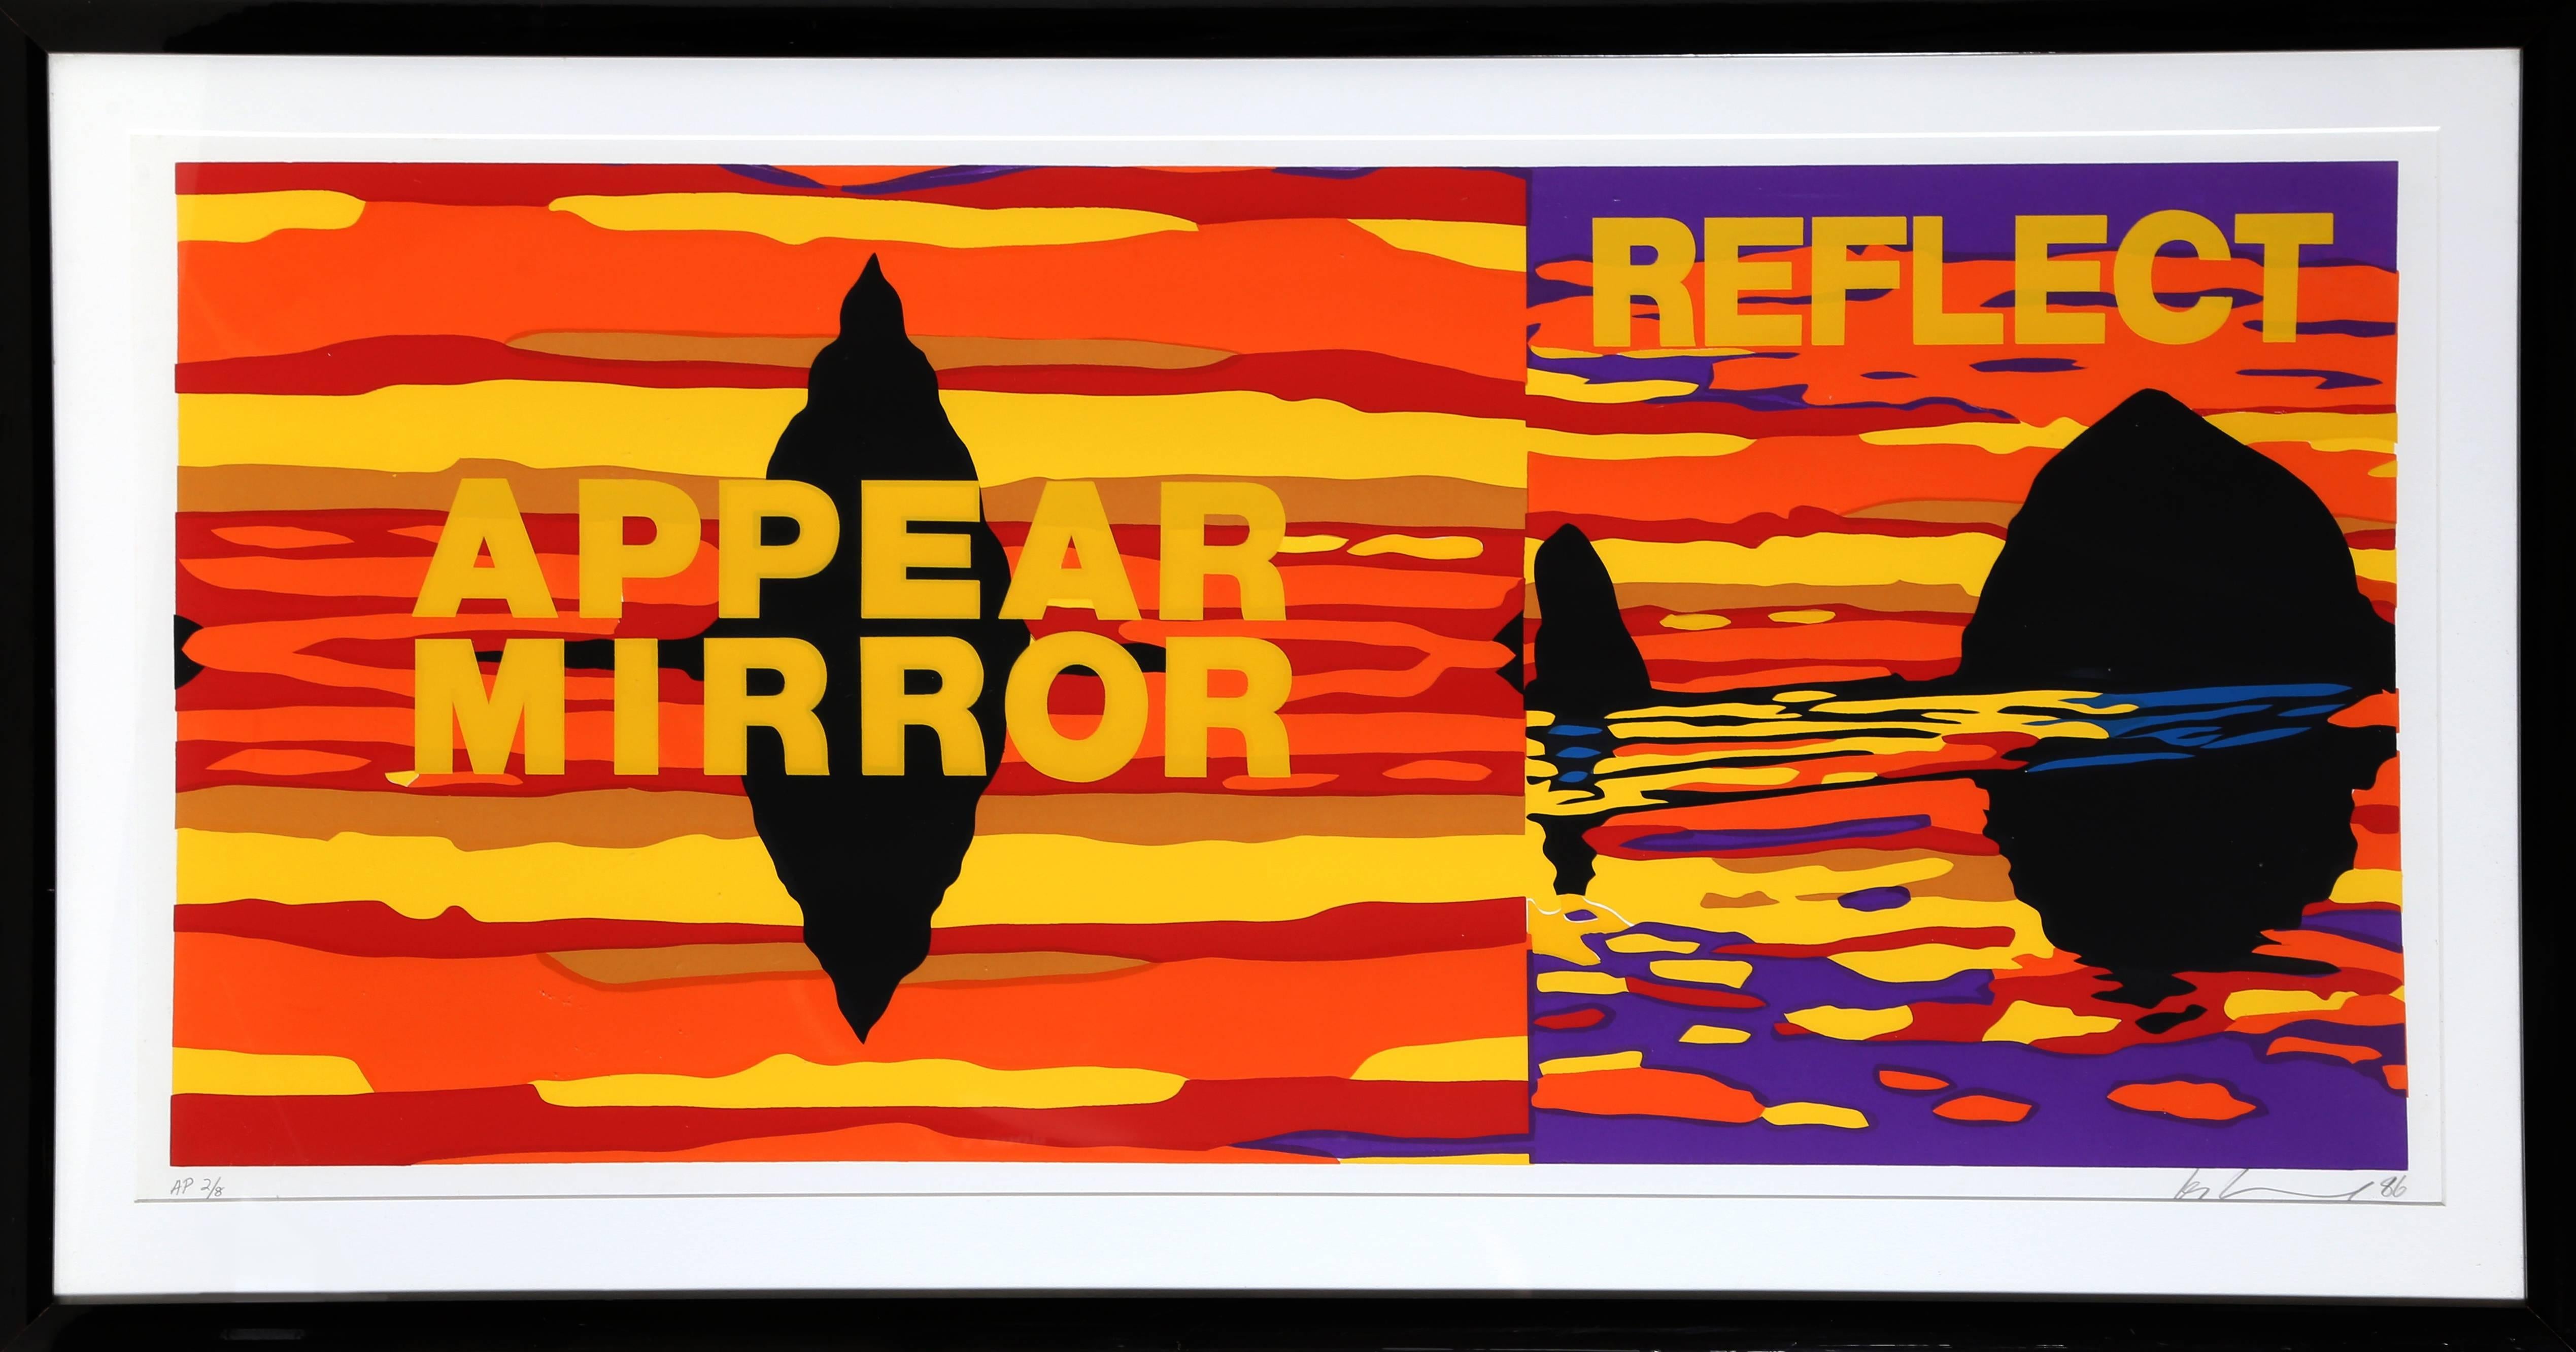 Artist: Les Levine, Canadian (1935 - )
Title: Appear Mirror Reflect
Year: 1986
Medium: Silkscreen, signed and numbered in pencil
Edition: AP 2/8
Size: 17.5 x 38 in. (44.45 x 96.52 cm)
Frame Size: 24 x 44.5 inches